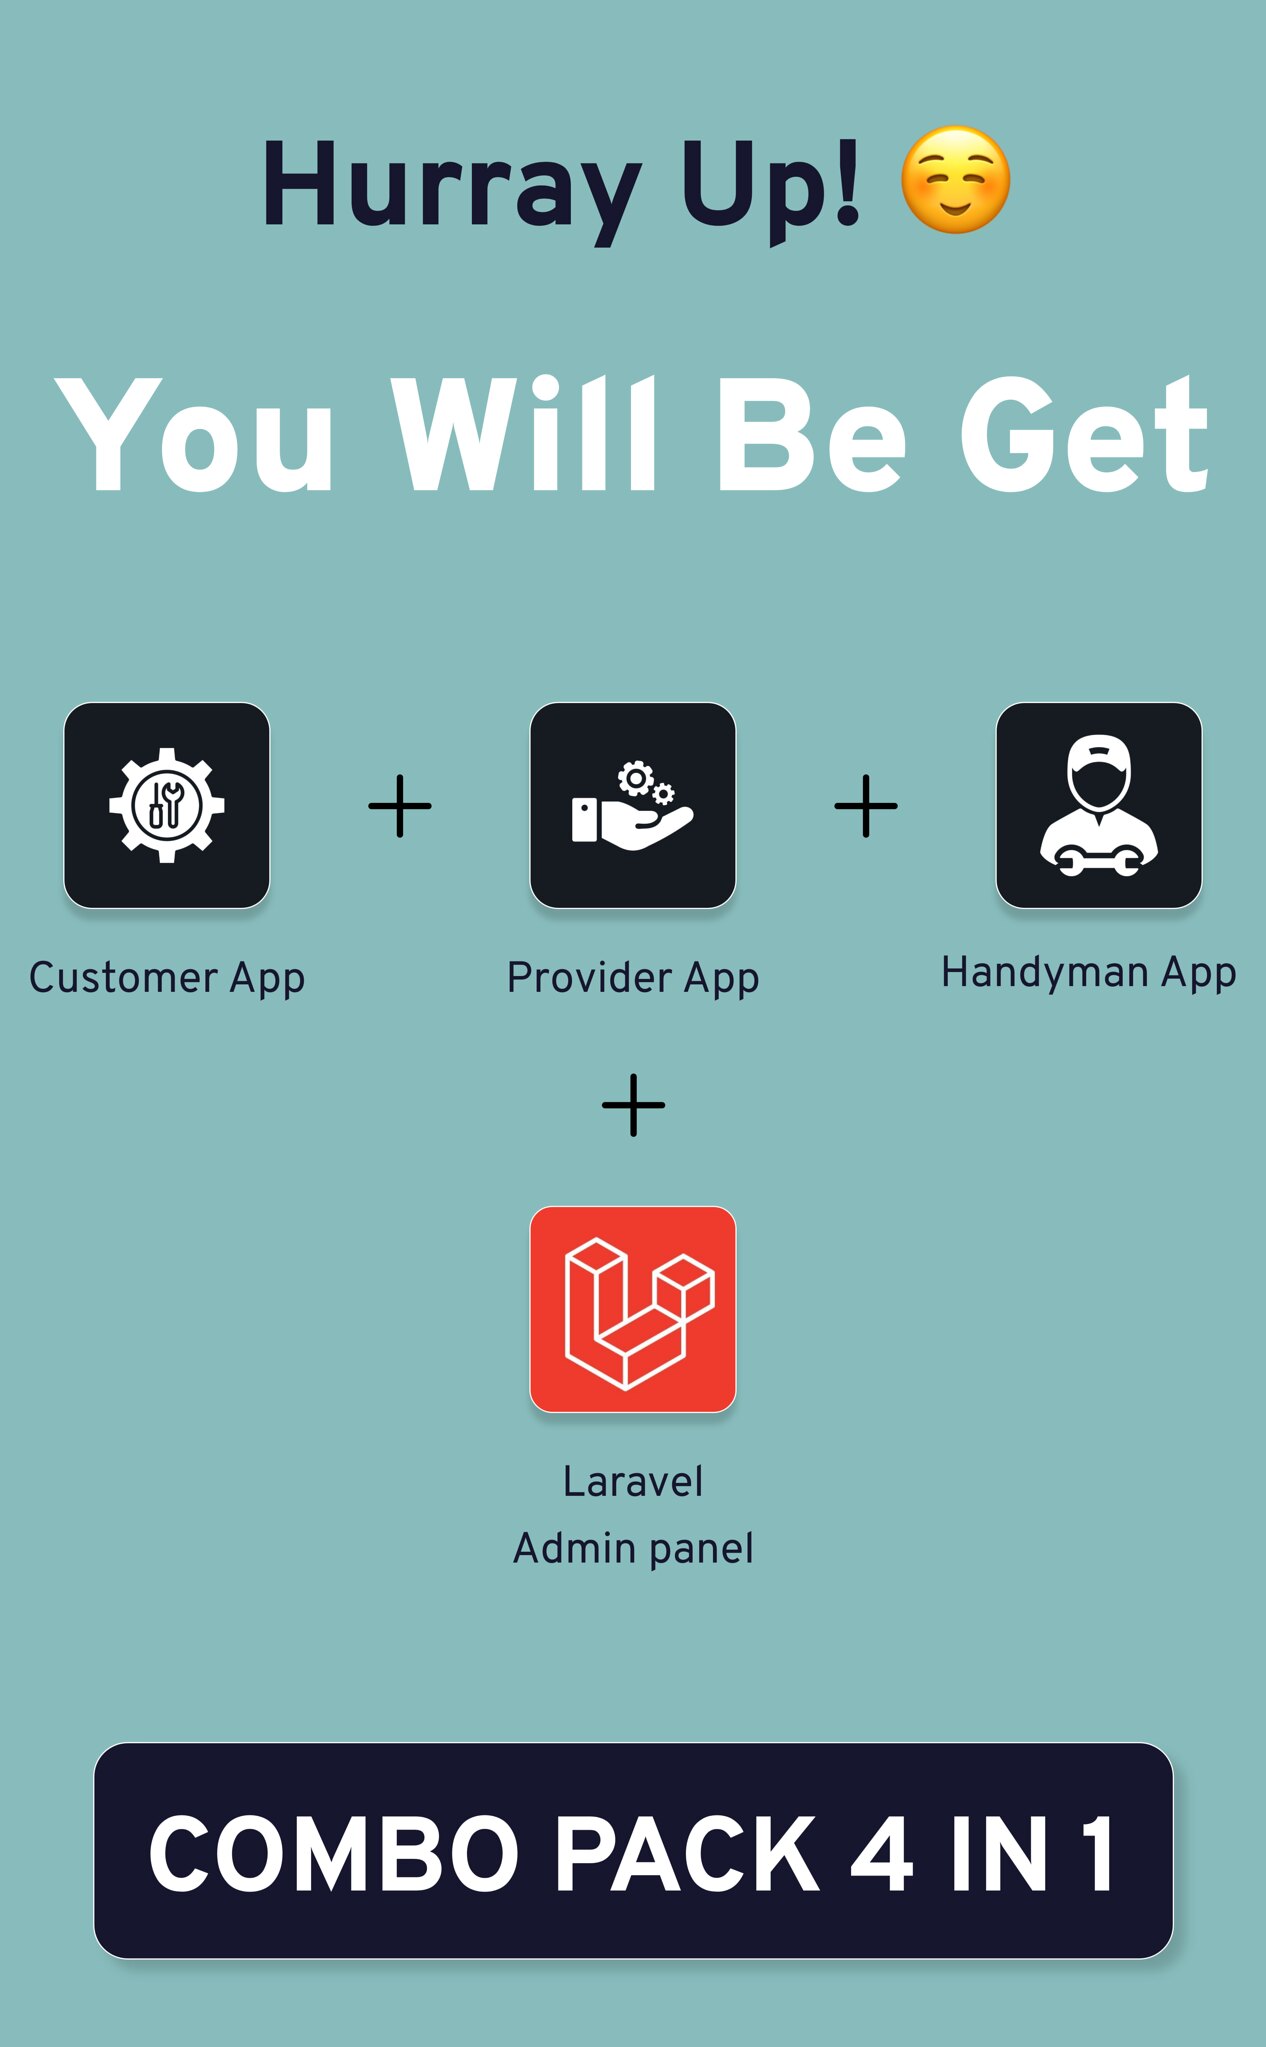 Handy Service - On-Demand Home Services, Business Listing, Handyman Booking Android App with Admin - 2